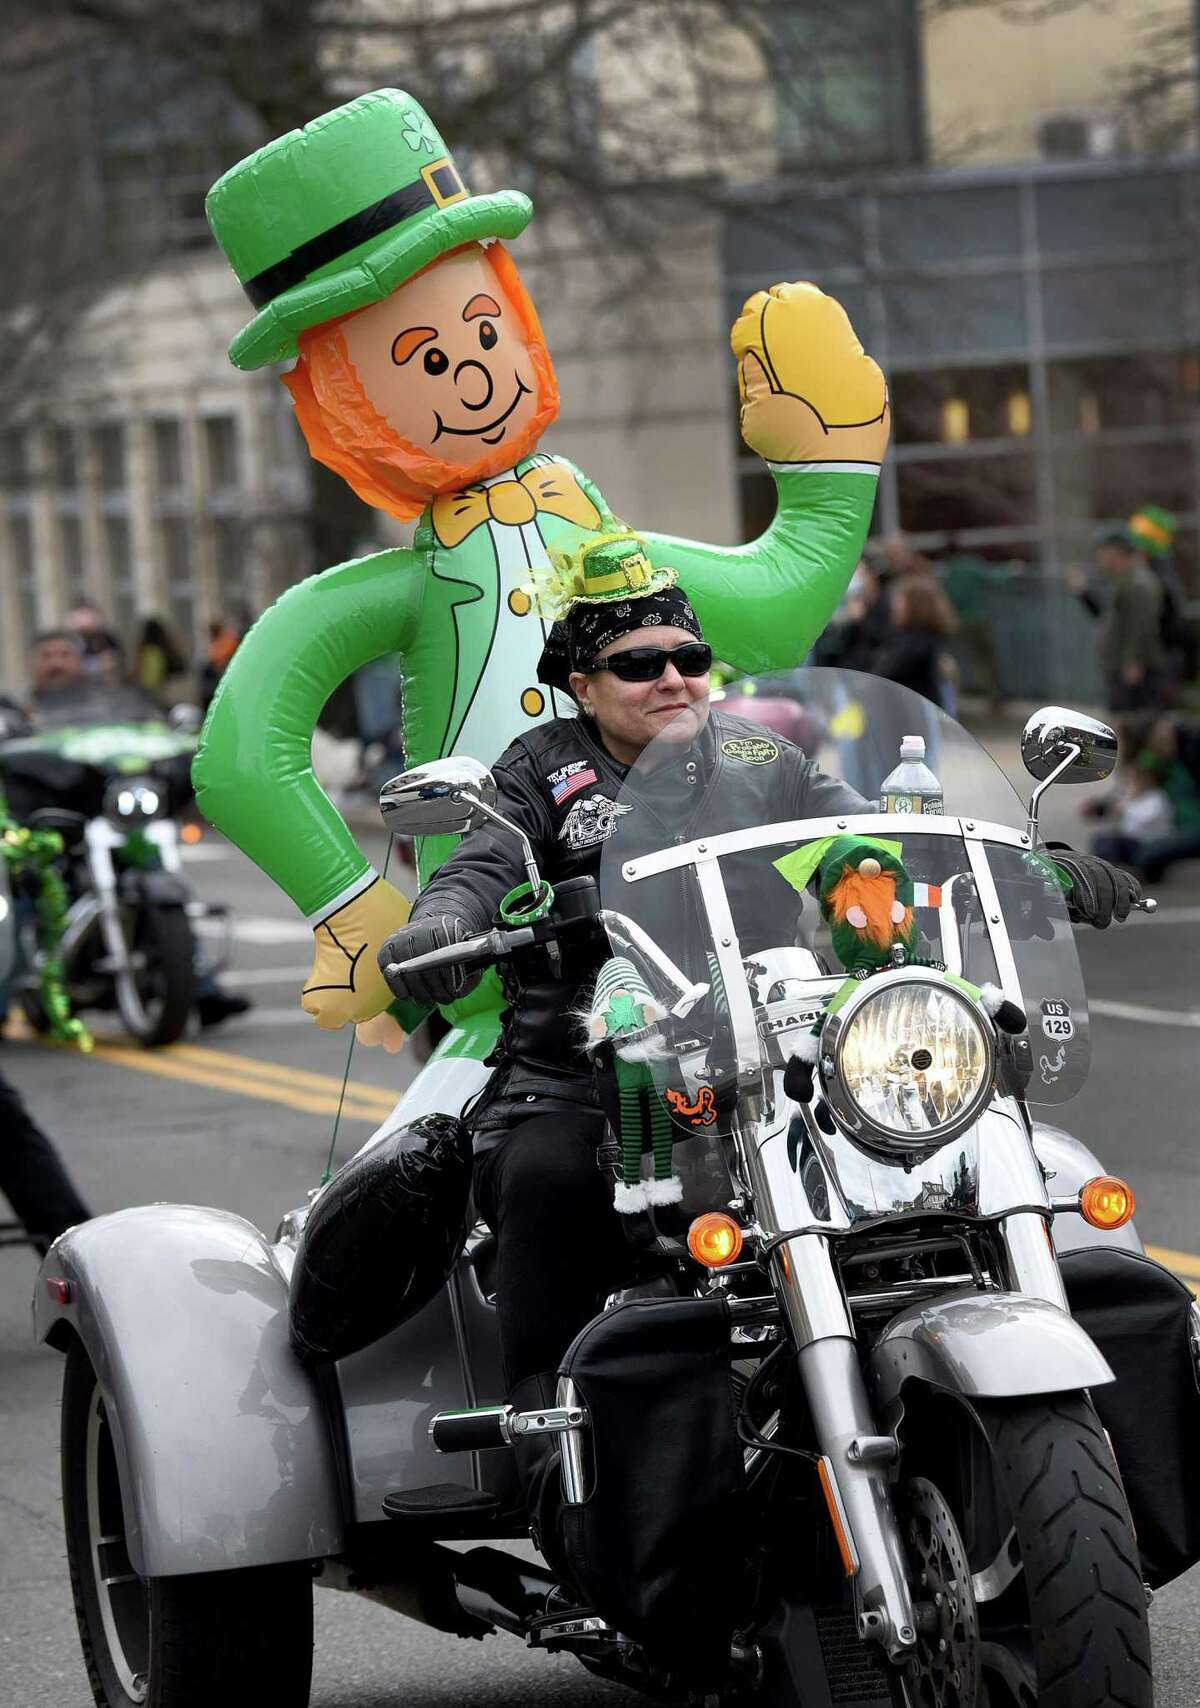 Shulie Weiss rides with a leprechaun in Sunday's parade. Greenwich's annual St. Patrick's Day Parade is held Sunday, March 20, 2022, after a two year break due to Covid-19 restrictions.